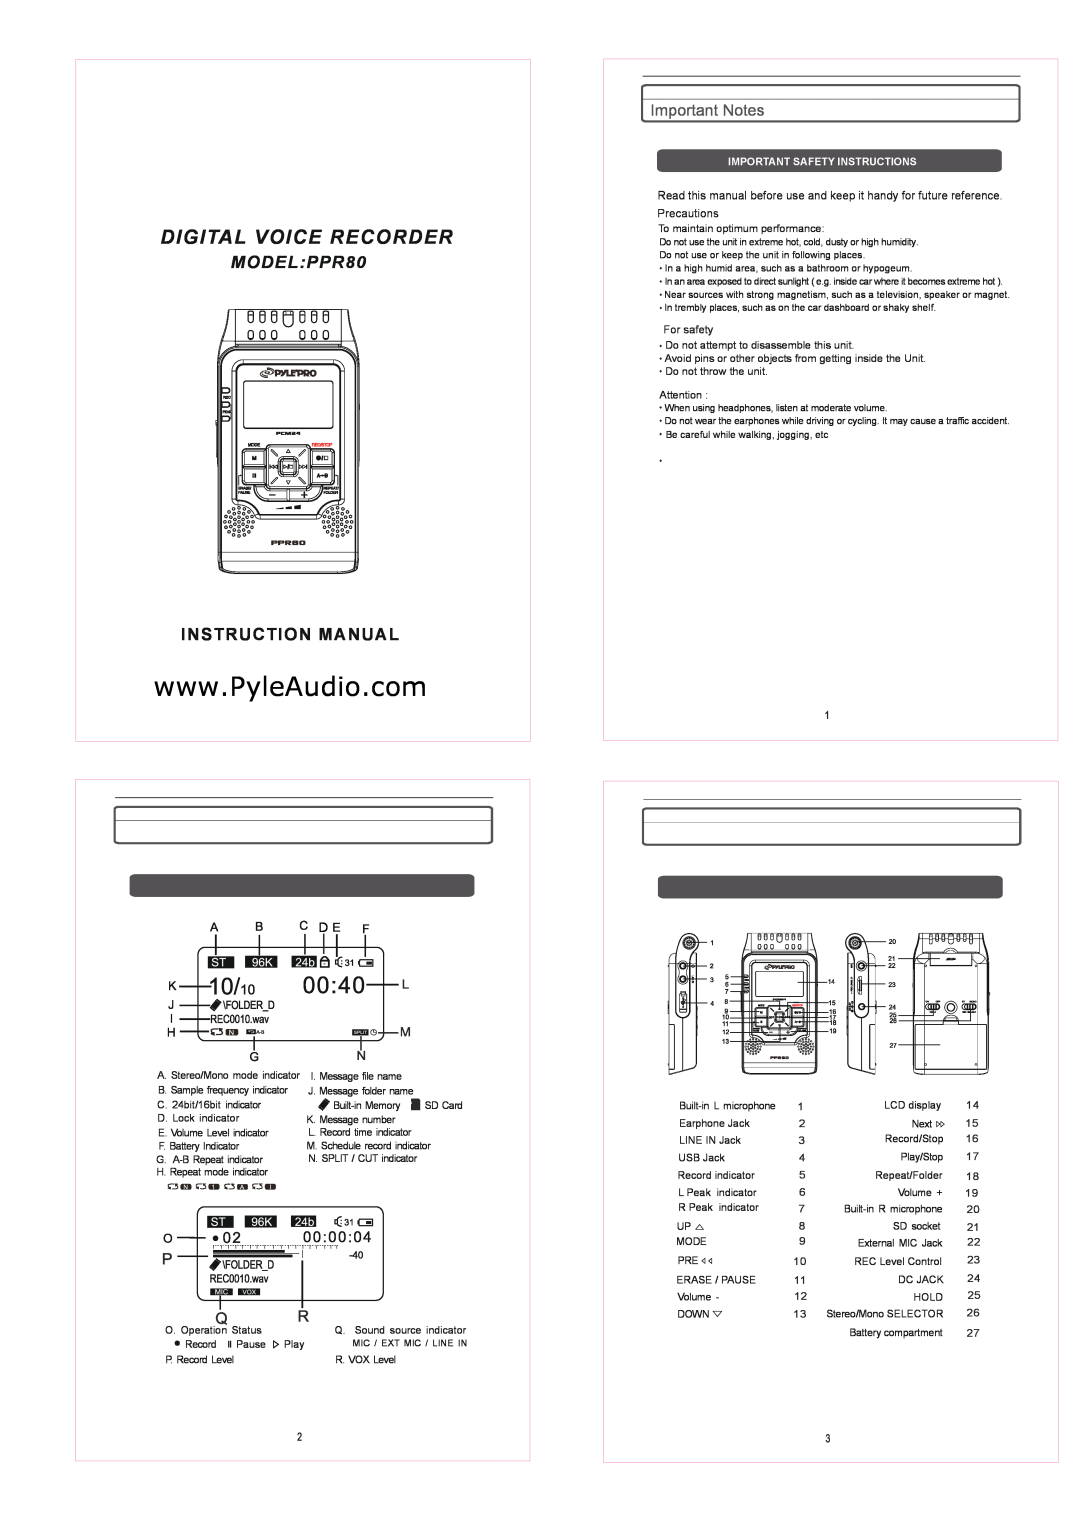 PYLE Audio instruction manual Important Notes, For safety, Digital Voice Recorder, MODELPPR80, Instruction Manual 